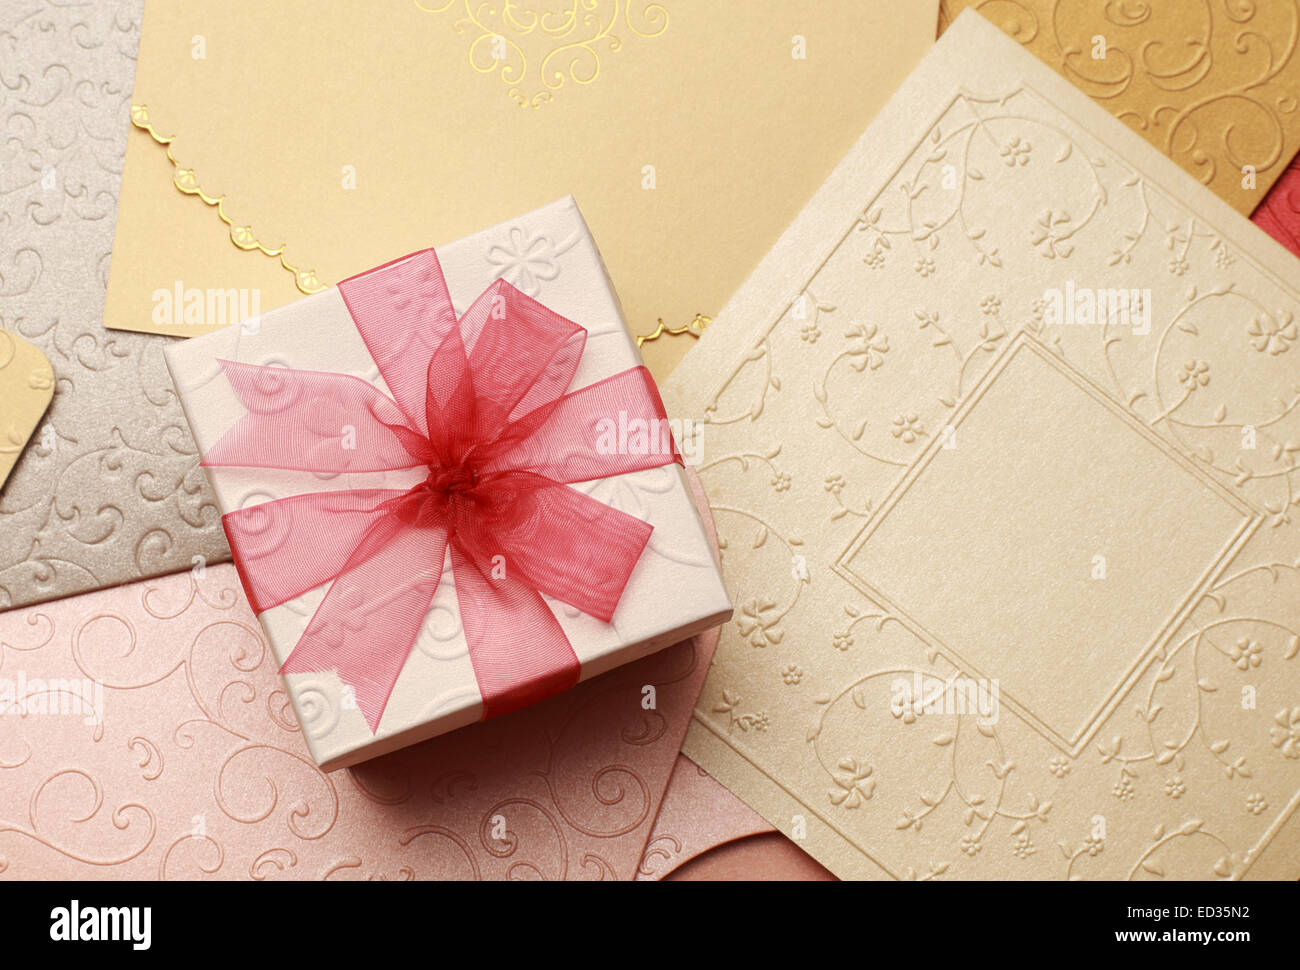 the gift box on greeting card for celebration events Stock Photo